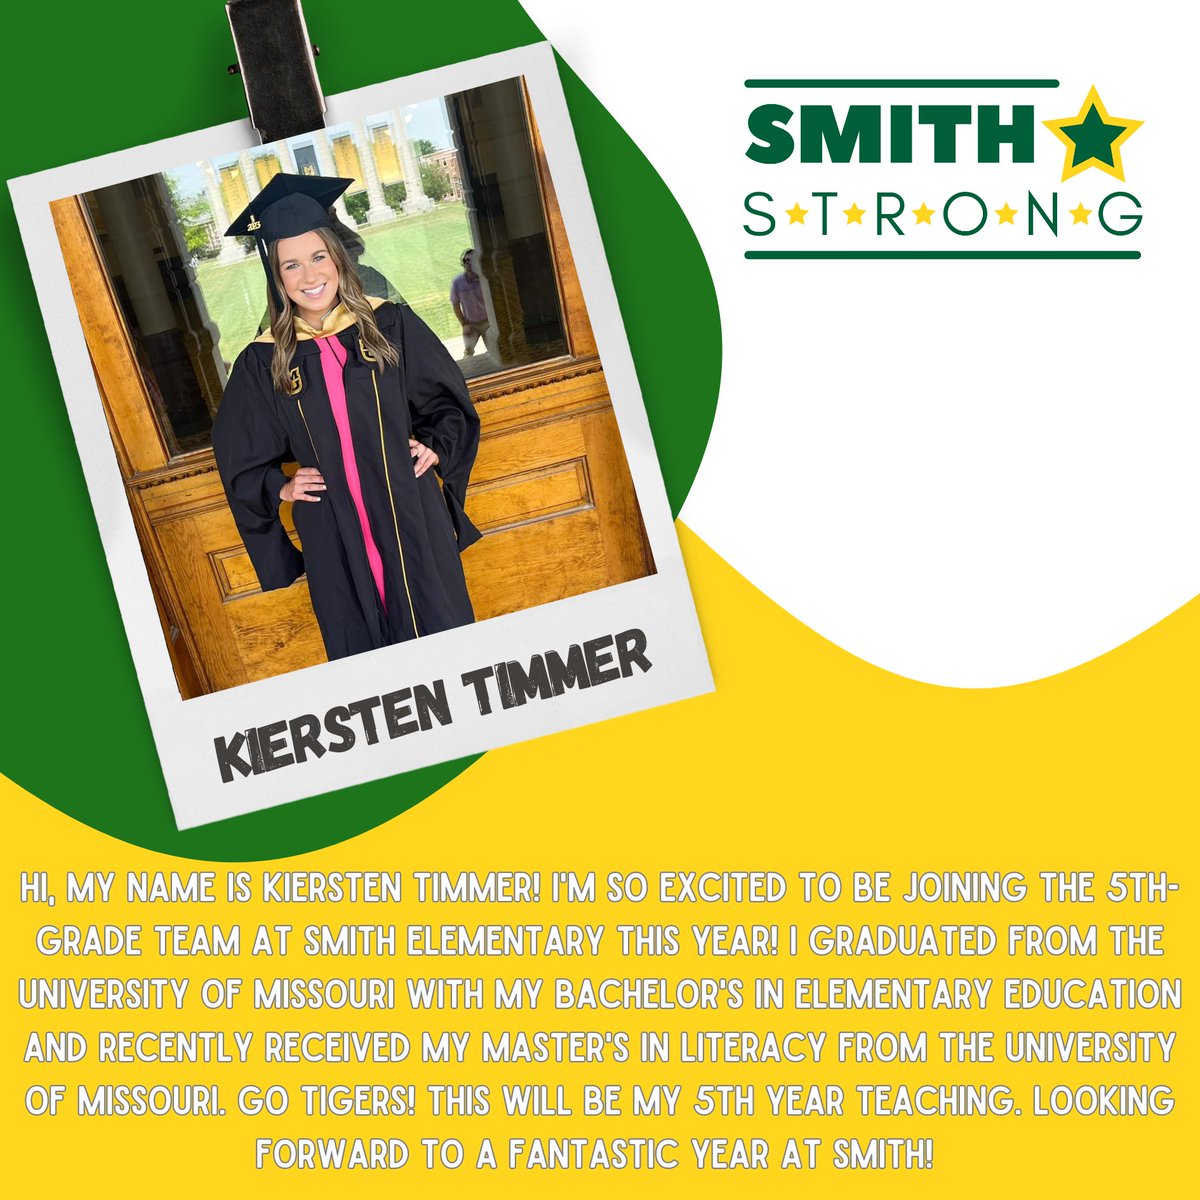 #SMITHSTRONG💪, help us welcome Kiersten Timmer to Smith Elementary! She will be joining our 5th-grade team here at Smith Elementary!💪💚⭐️